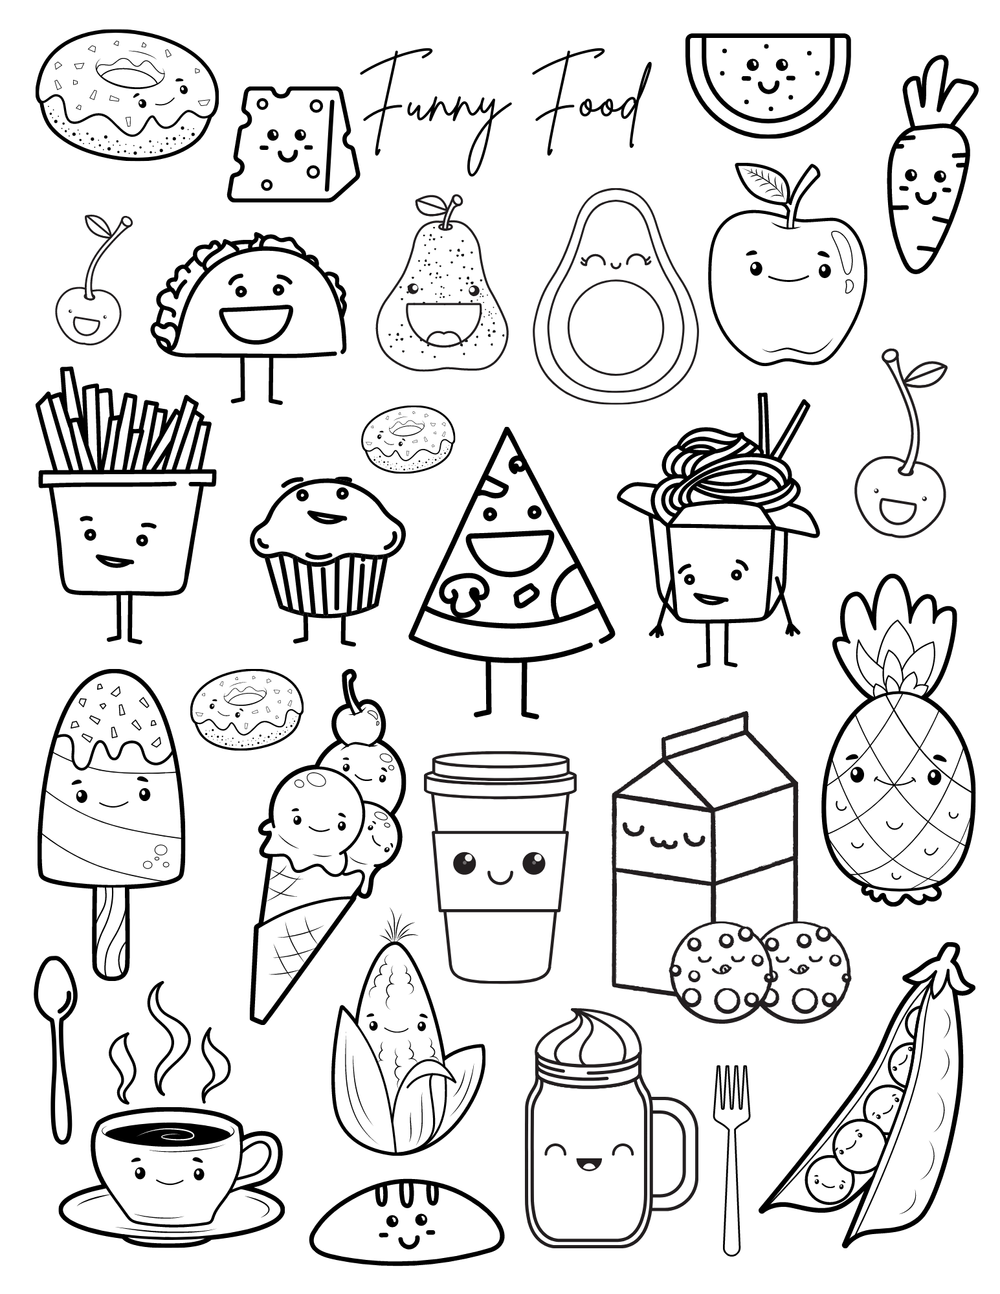 Coloring Pages for All Ages — Kaylee Miller